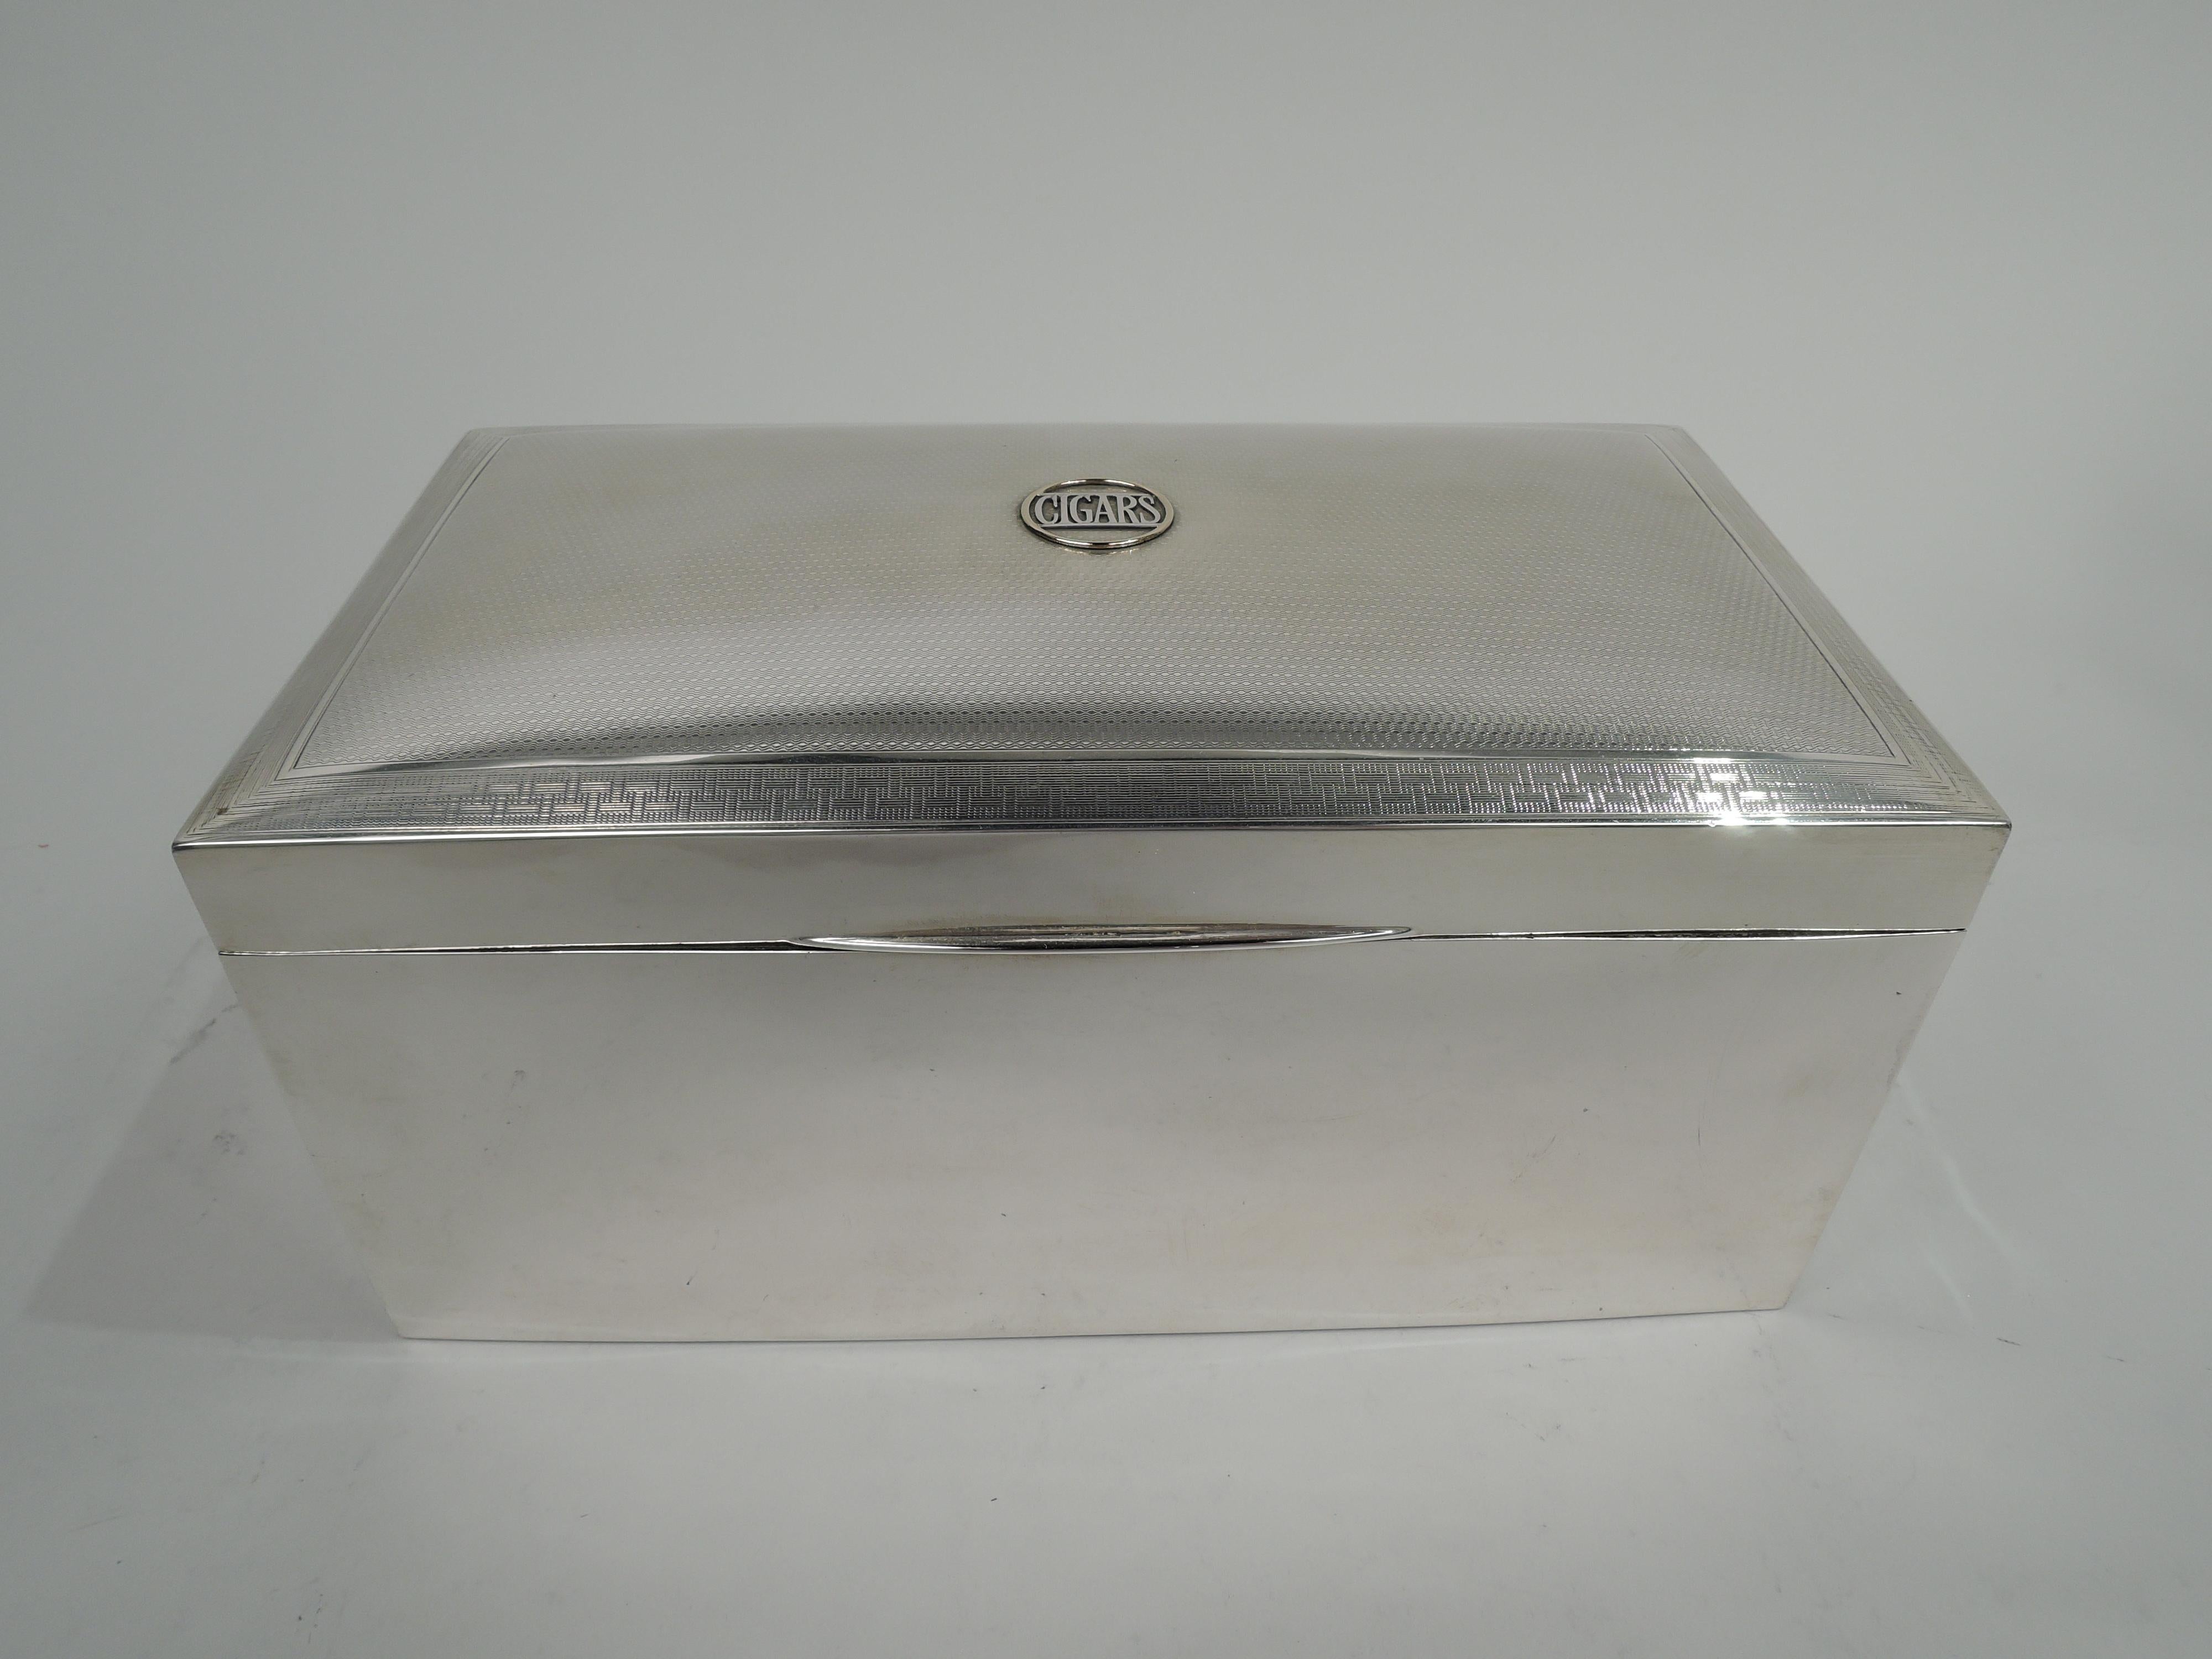 English Modern sterling silver cigar box, 1919. Rectangular with plain straight sides. Cover hinged with tapering tab; top gently curved with engine-turned wave ornament bordered by fretwork, and centrally mounted gold ring inset with word “CIGARS”.